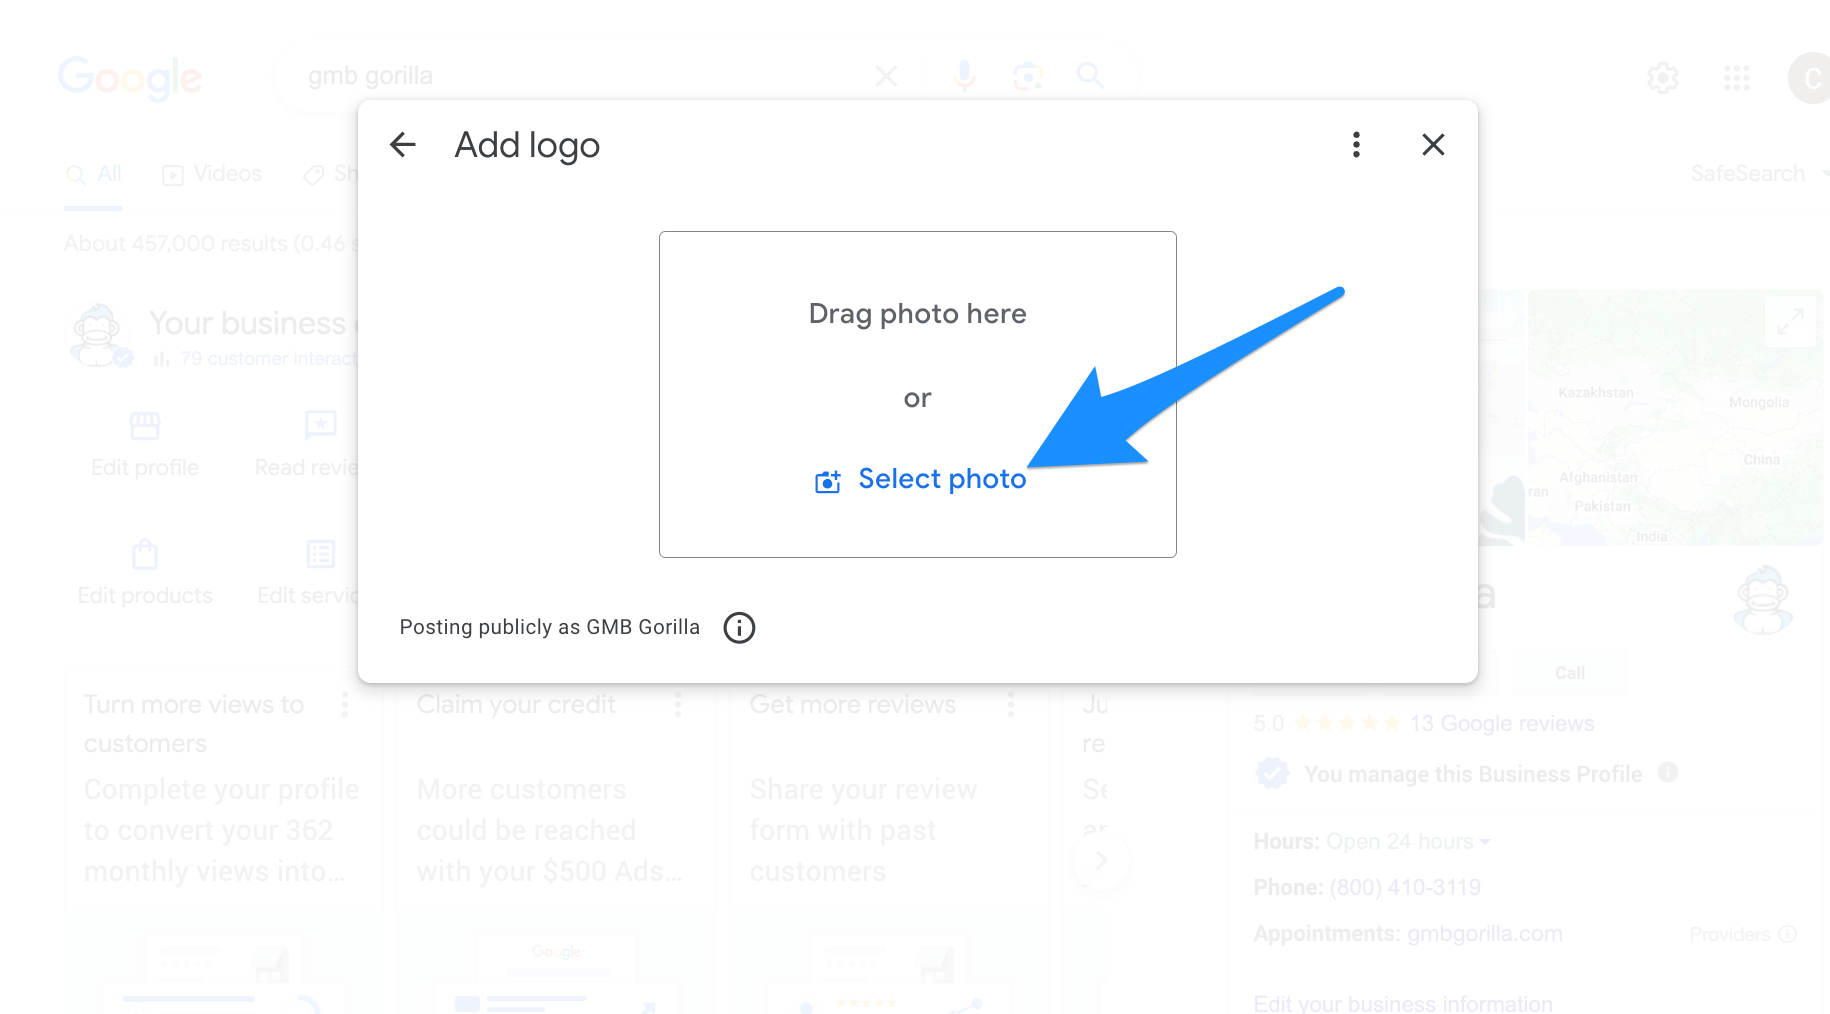 image of selecting the profile picture to be uploaded